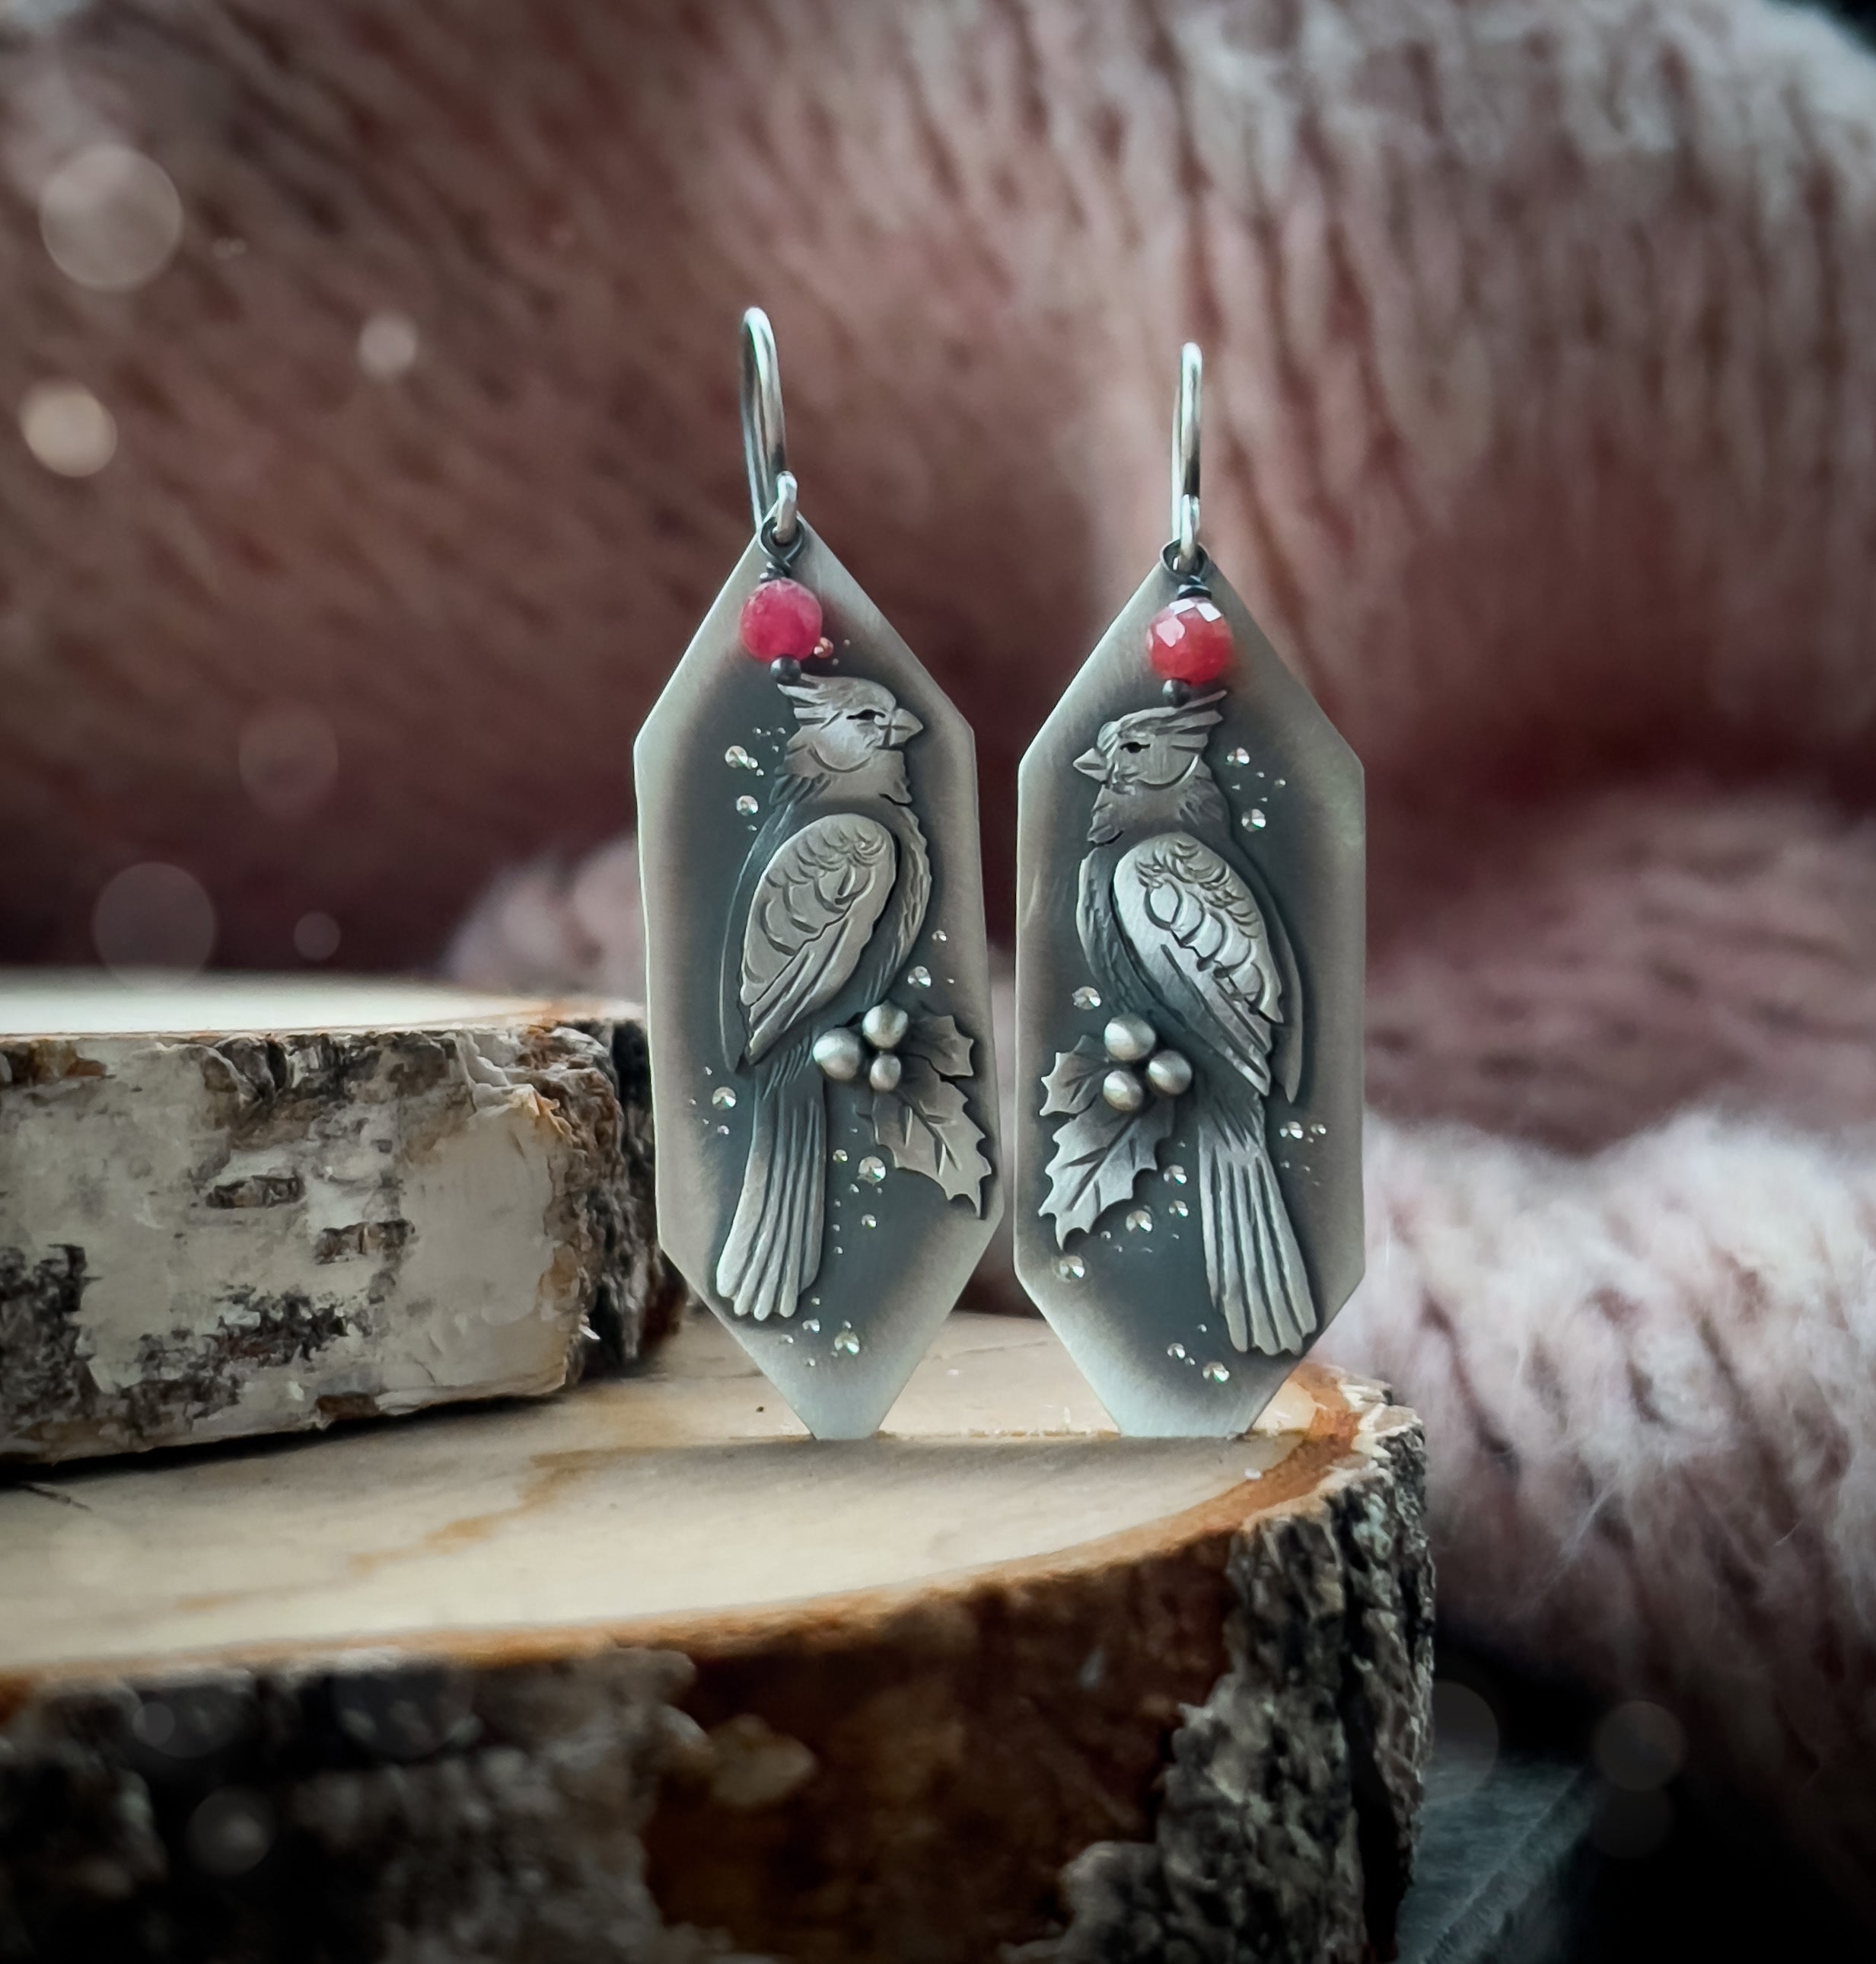 The Red Cardinal Earrings